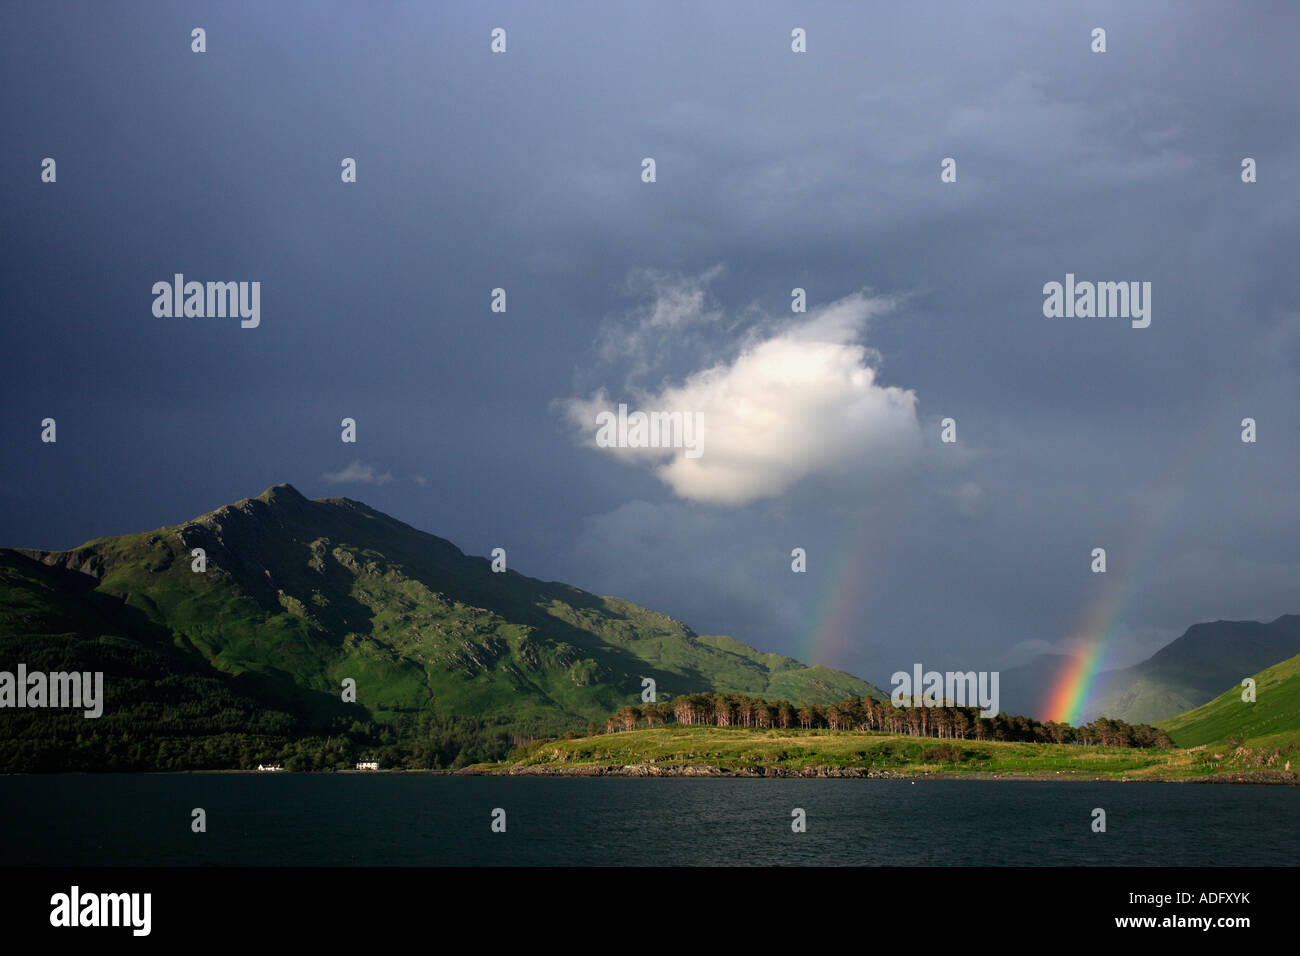 A RAINBOW AND DARK BROODING SKY MAKE A DRAMATIC BACKDROP TO INVERIE KNOYDART. Stock Photo